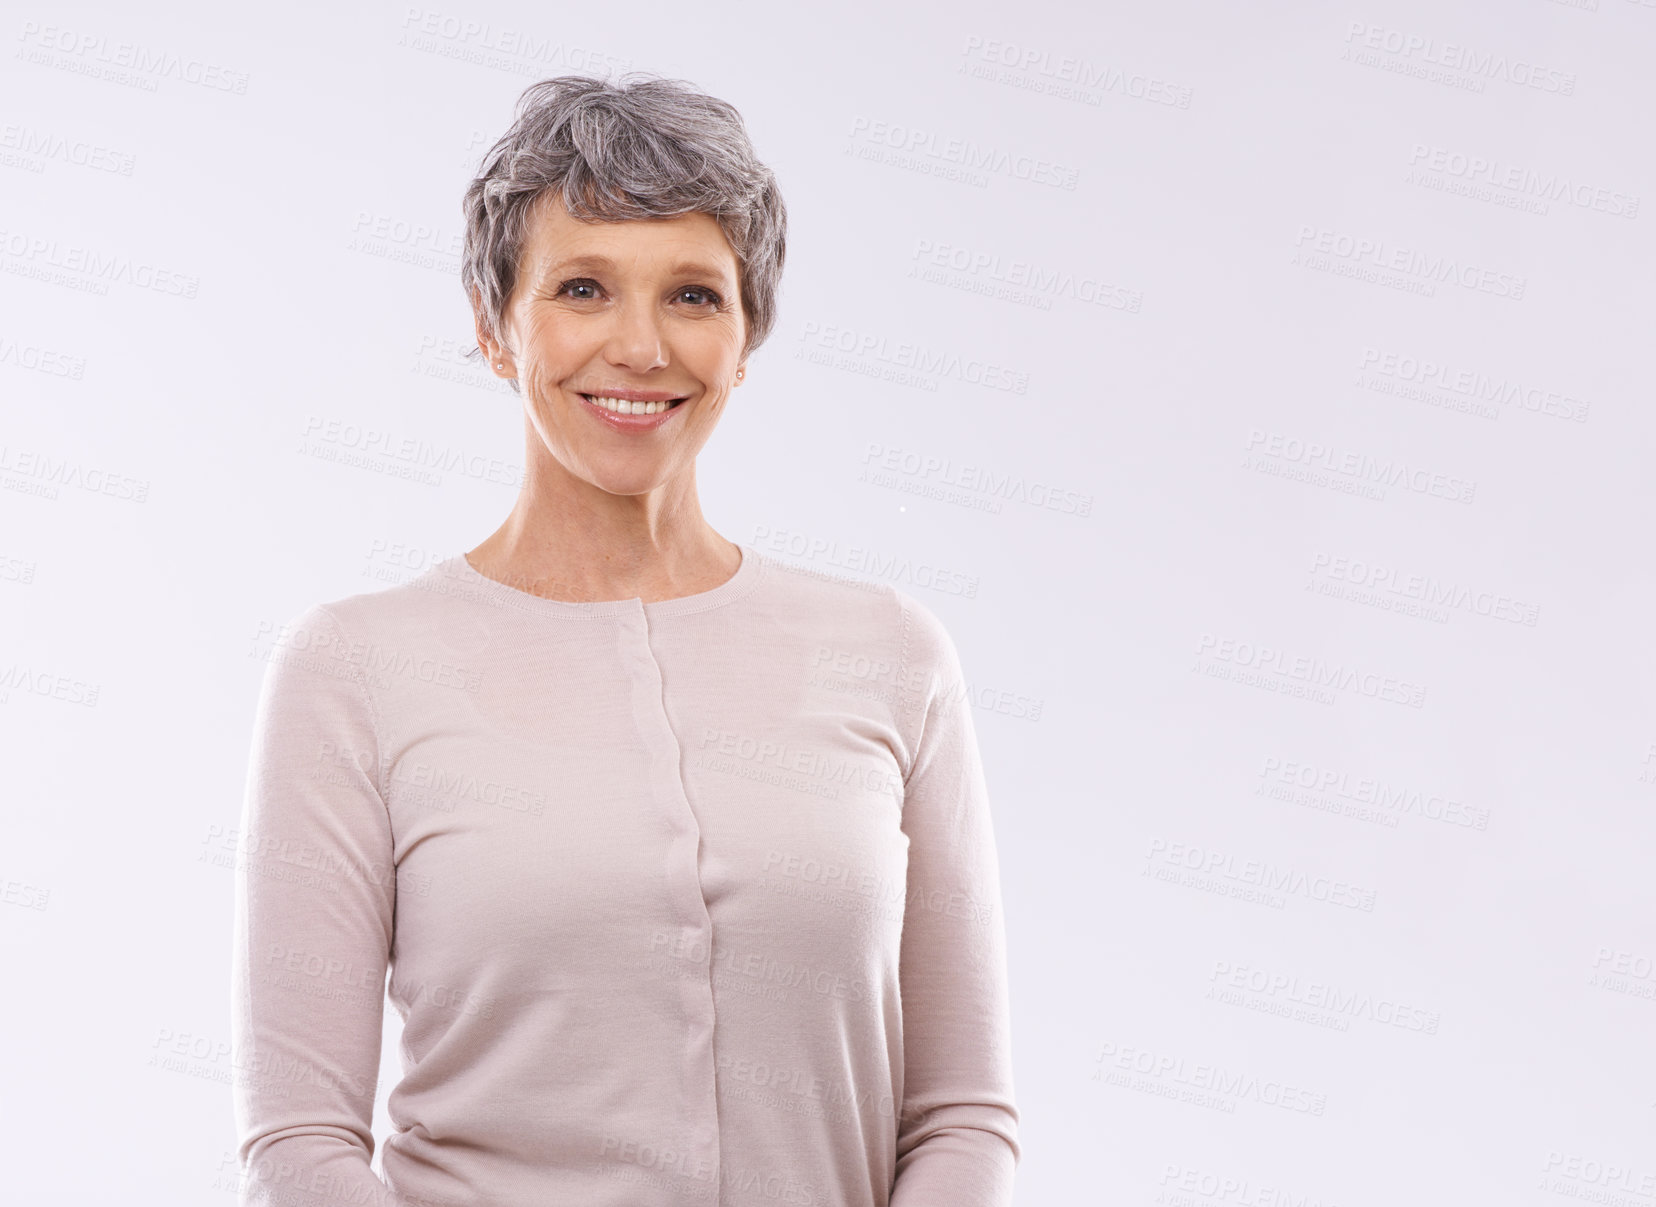 Buy stock photo Studio portrait of a happy mature woman against a white background